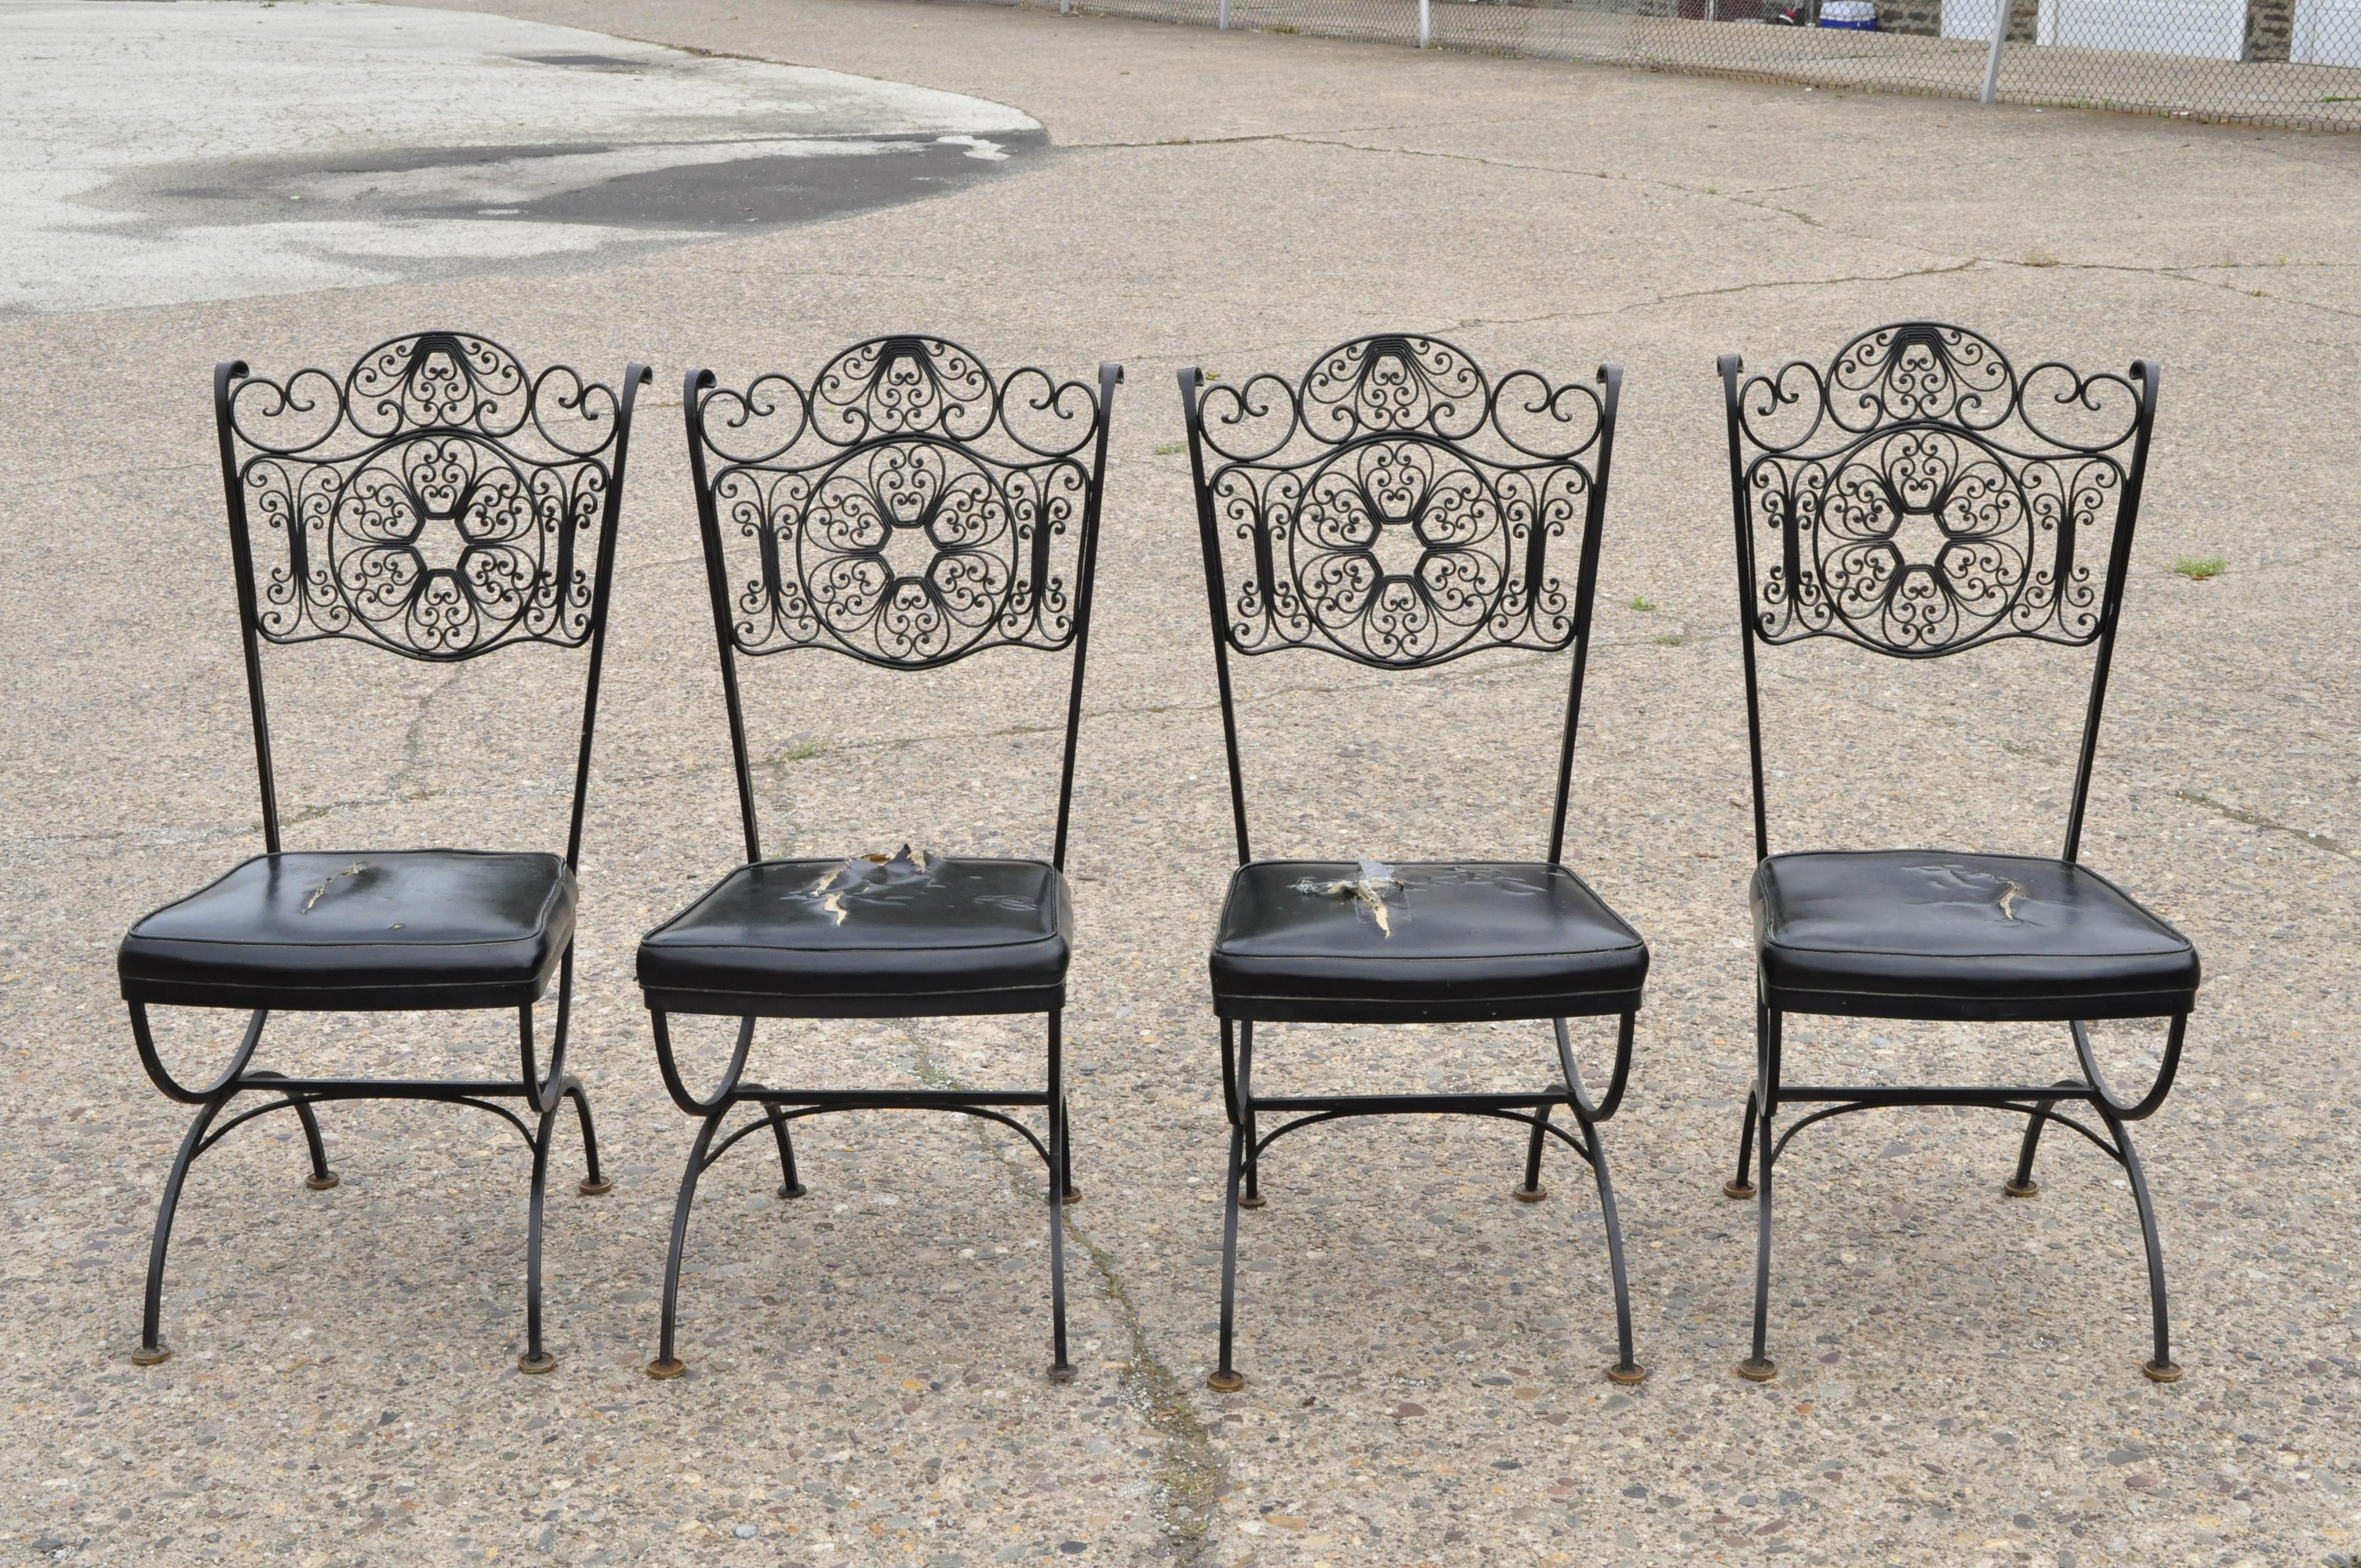 Set of 4 vintage Woodard Andalusian style wrought iron dining chairs by Contempo Frames. Items feature fancy scrollwork backs, Curule stretcher base, wrought iron construction, original label, quality American craftsmanship, great style and form,